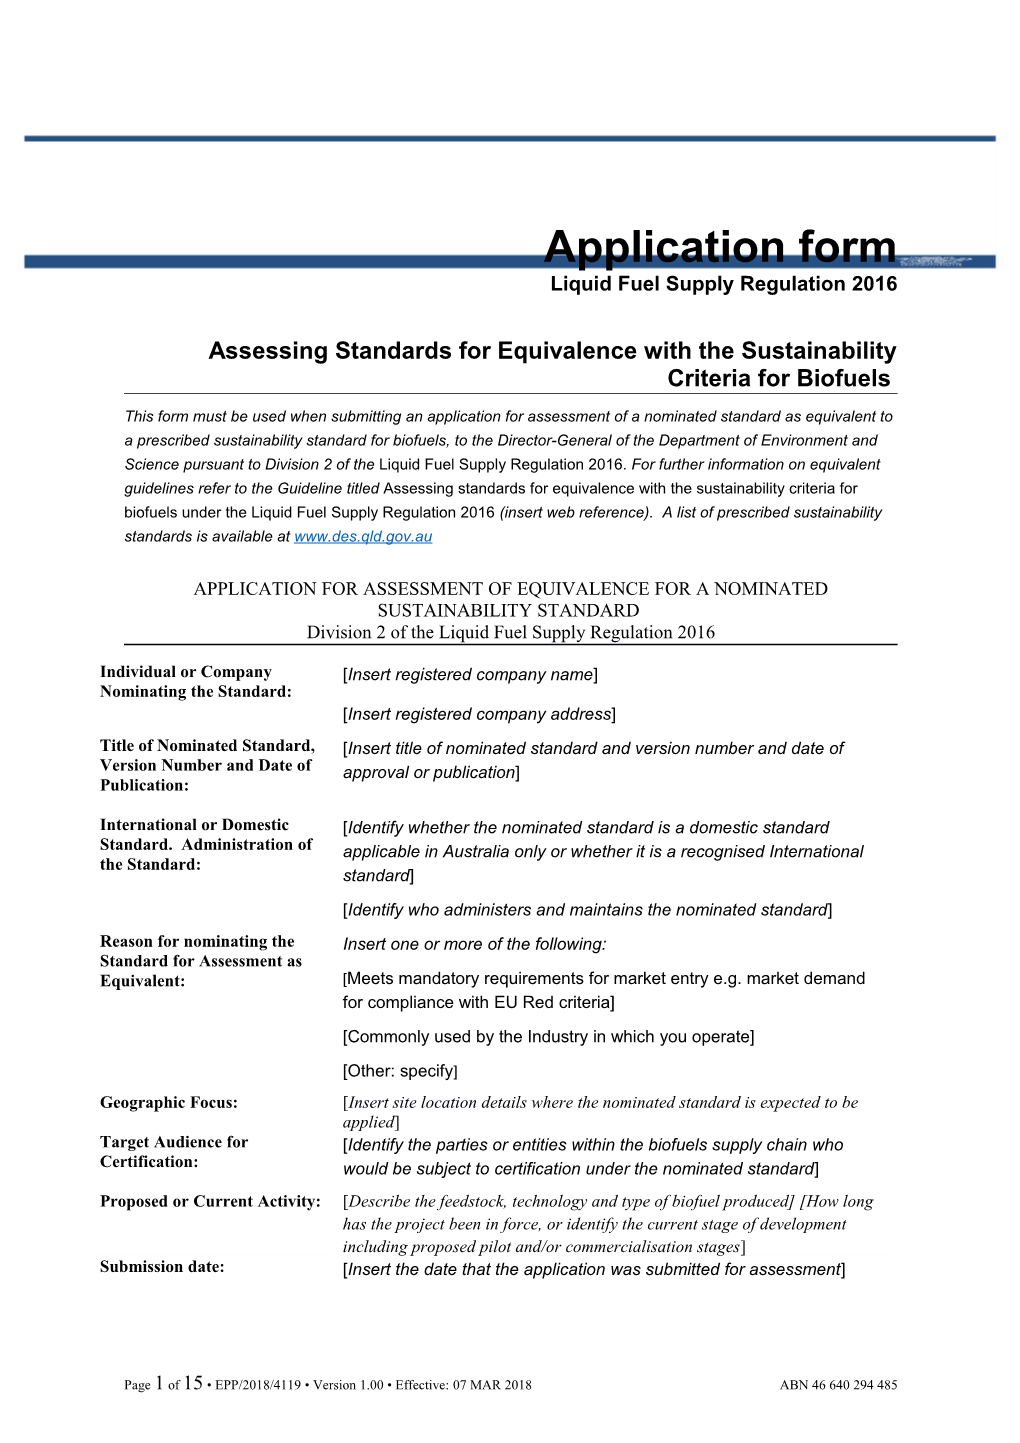 Application Form for Assessing Standards for Equivalence with the Sustainability Criteria